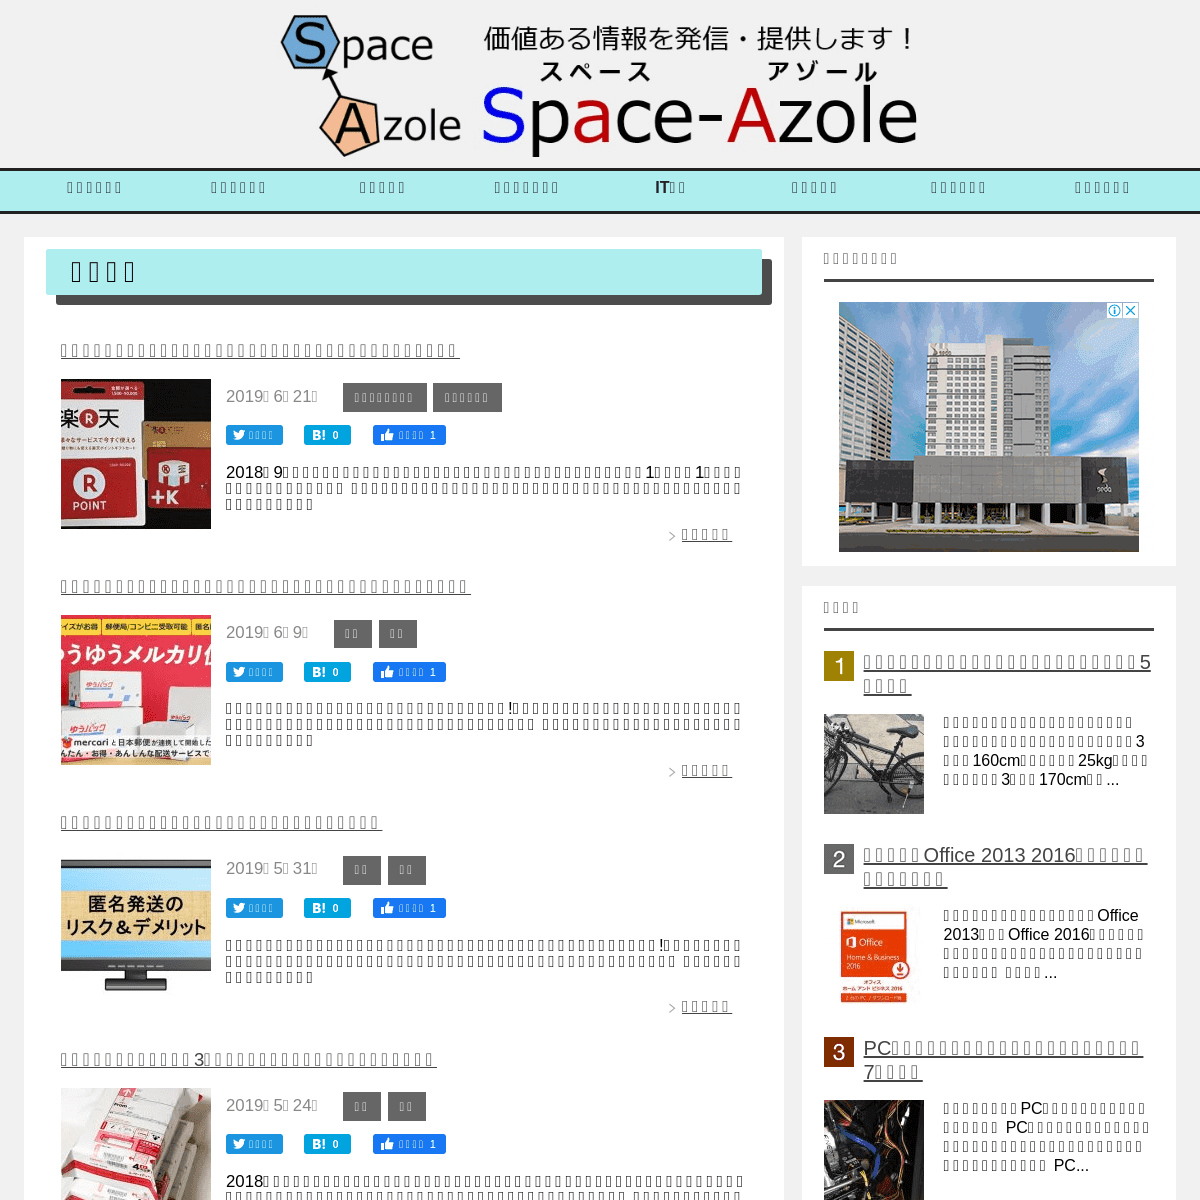 A complete backup of space-azole.com